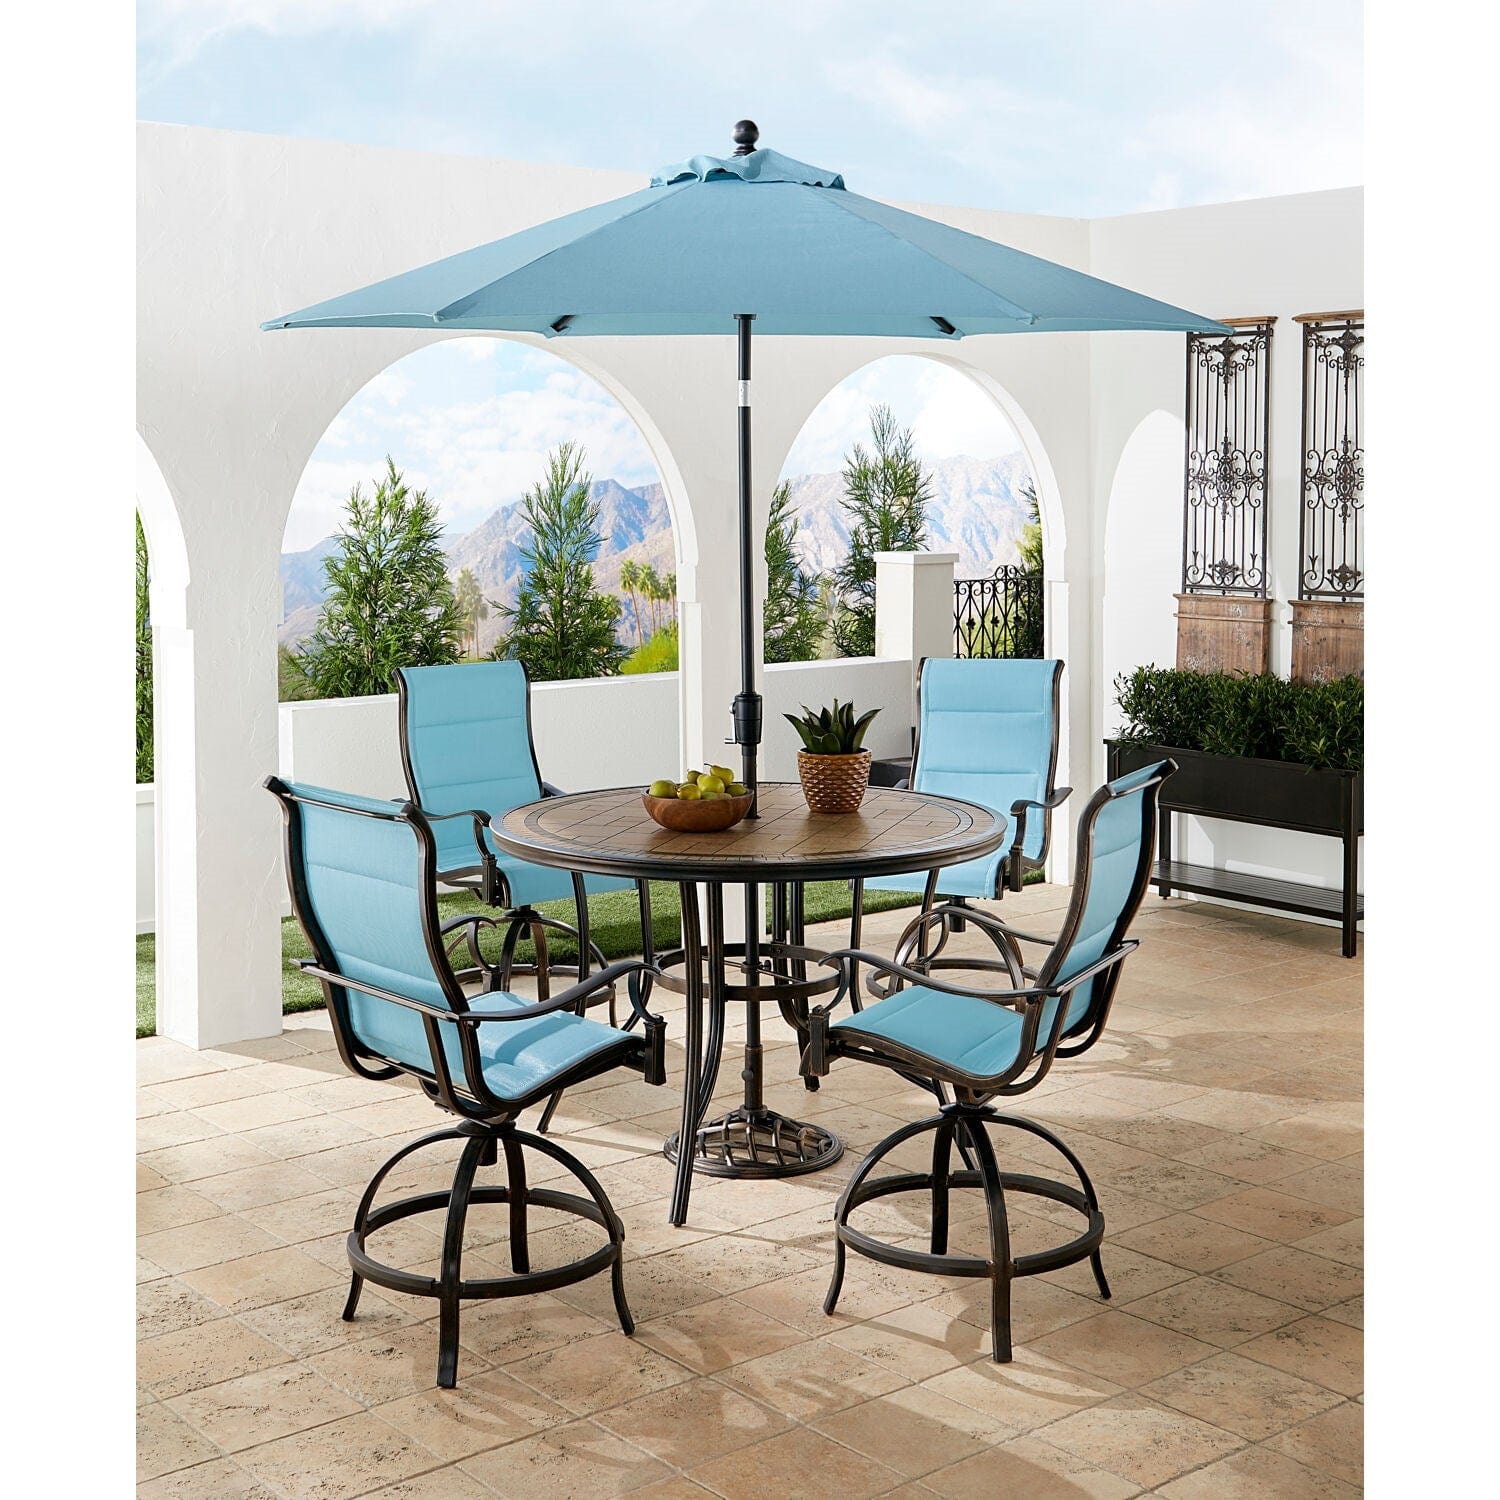 Hanover Outdoor Dining Set Hanover Monaco 5-Piece High-Dining Set in Blue with 4 Padded Counter-Height Swivel Chairs, 56-In. Tile-Top Table and 9-Ft. Umbrella | MONDN5PCPDBRC-SU-B